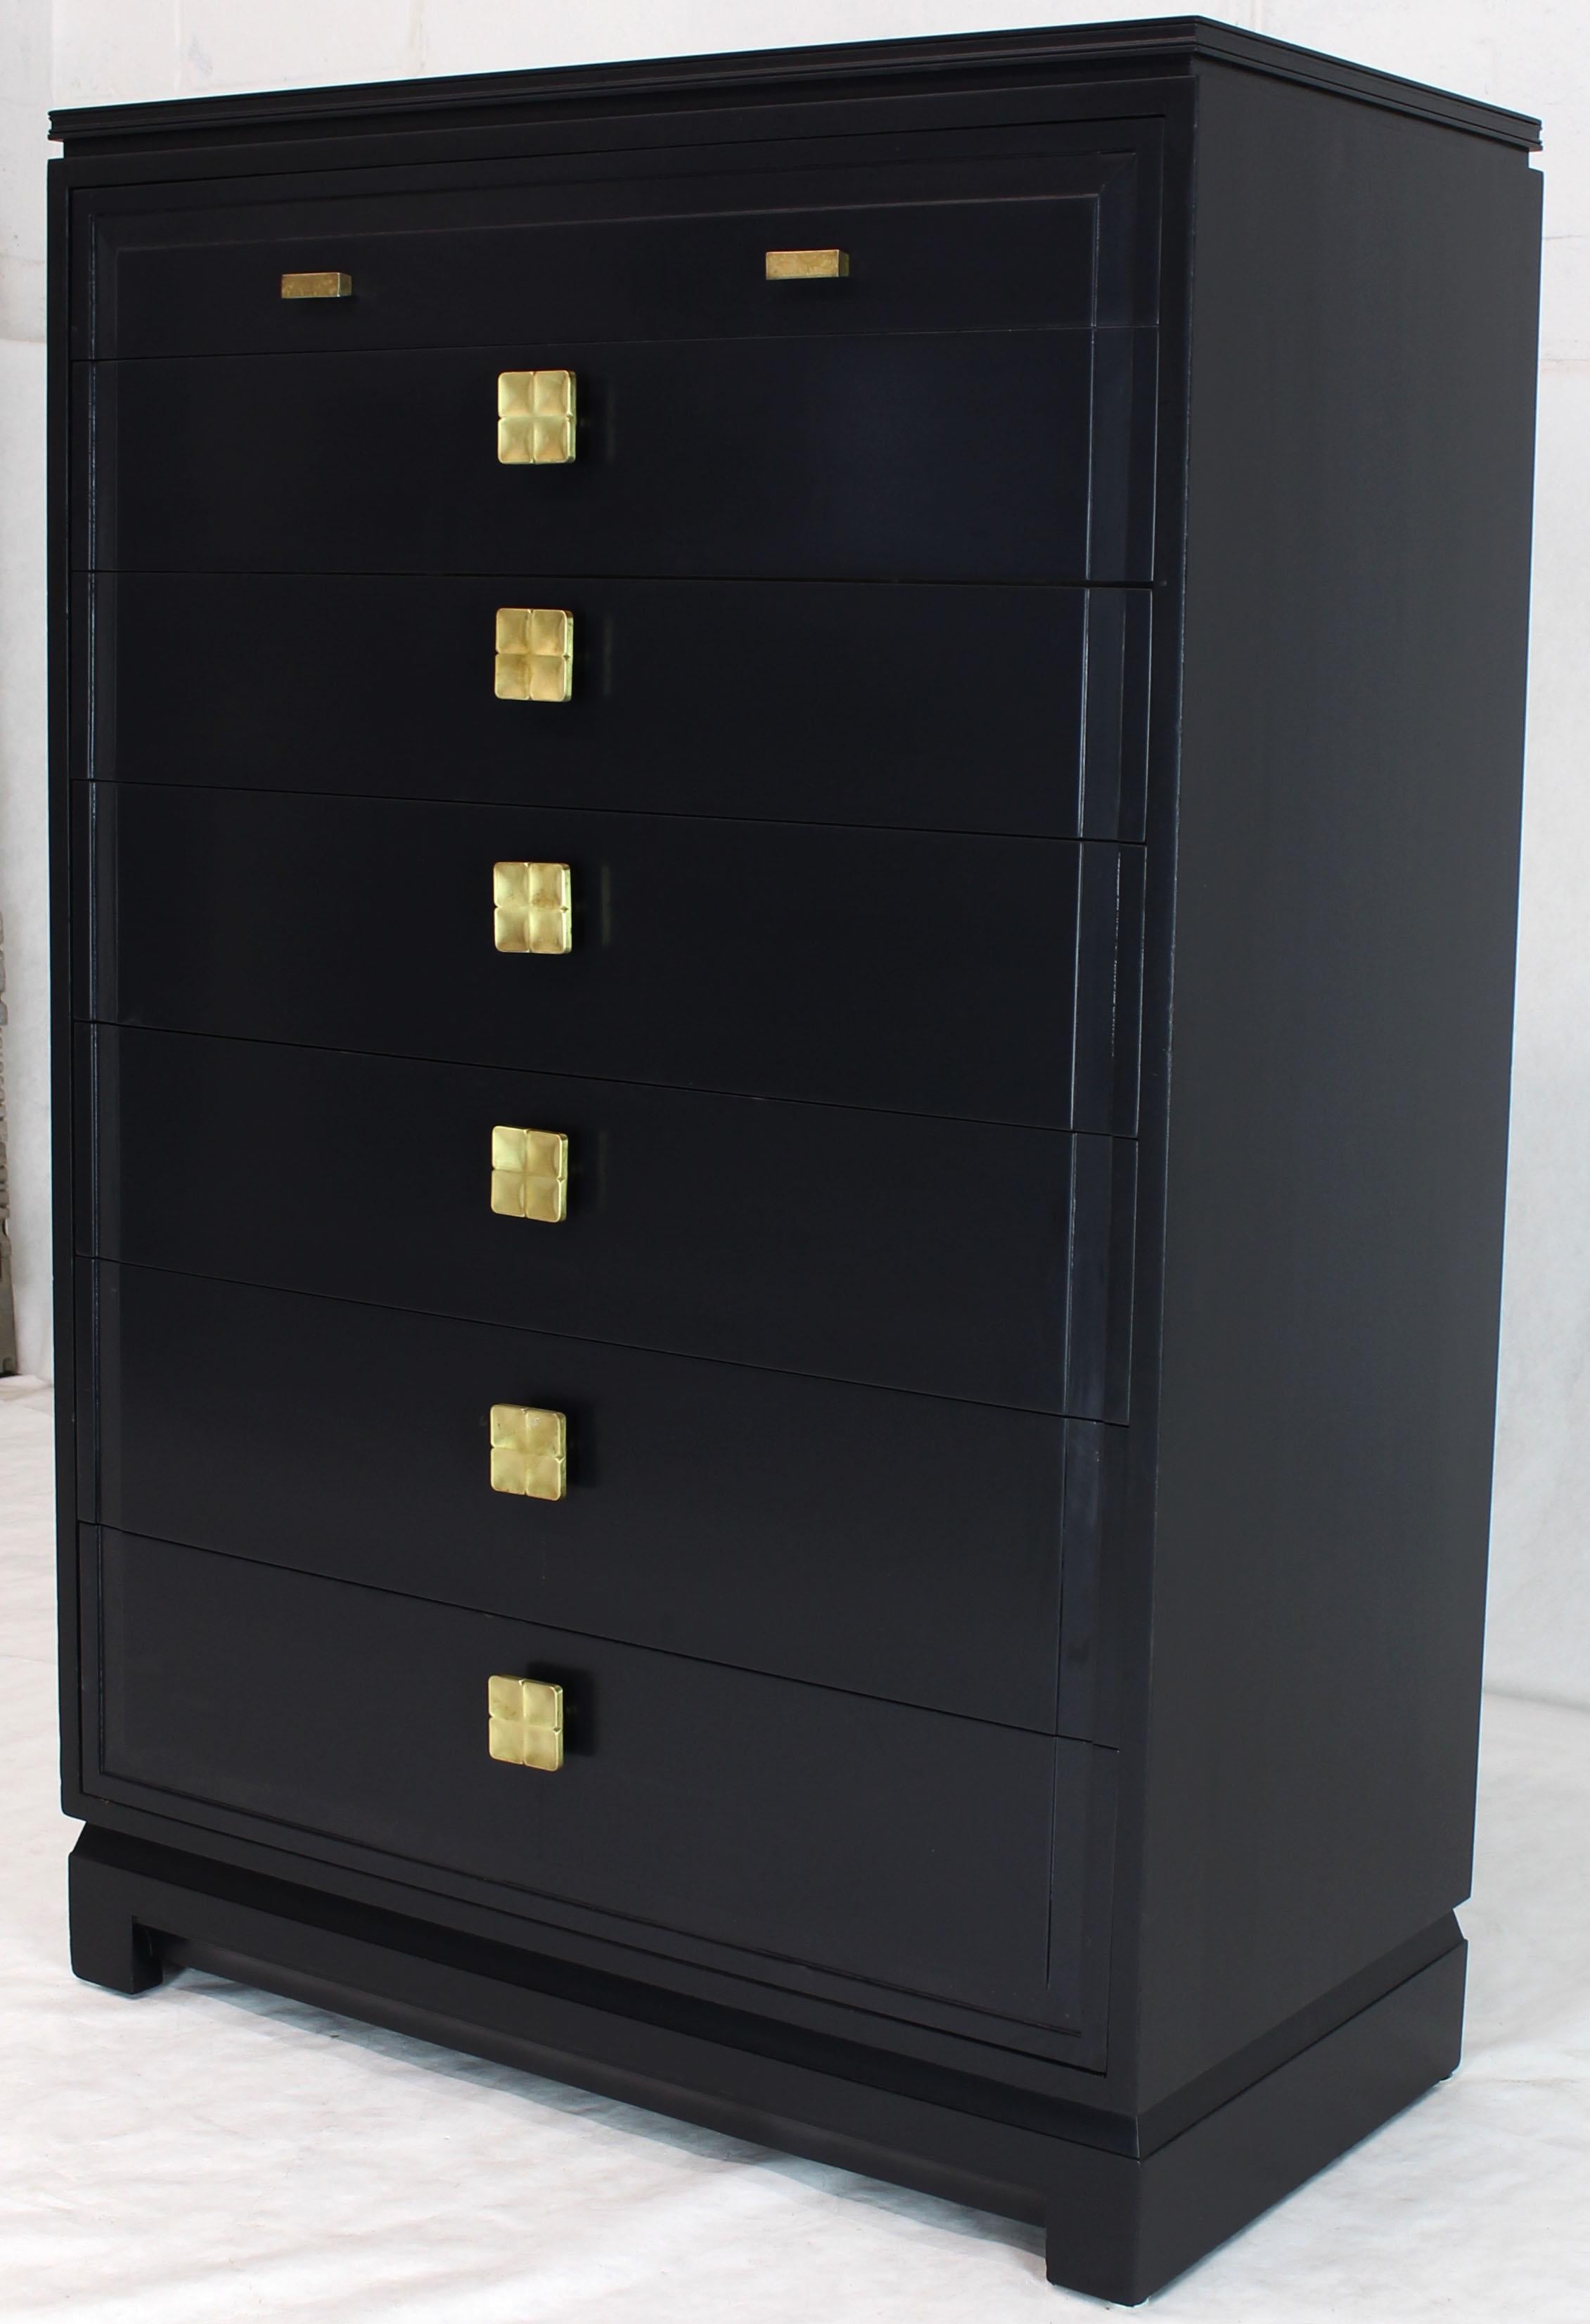 Lacquered Black Lacquer Tall Decorative Brass Hardware Pulls High Chest Dresser